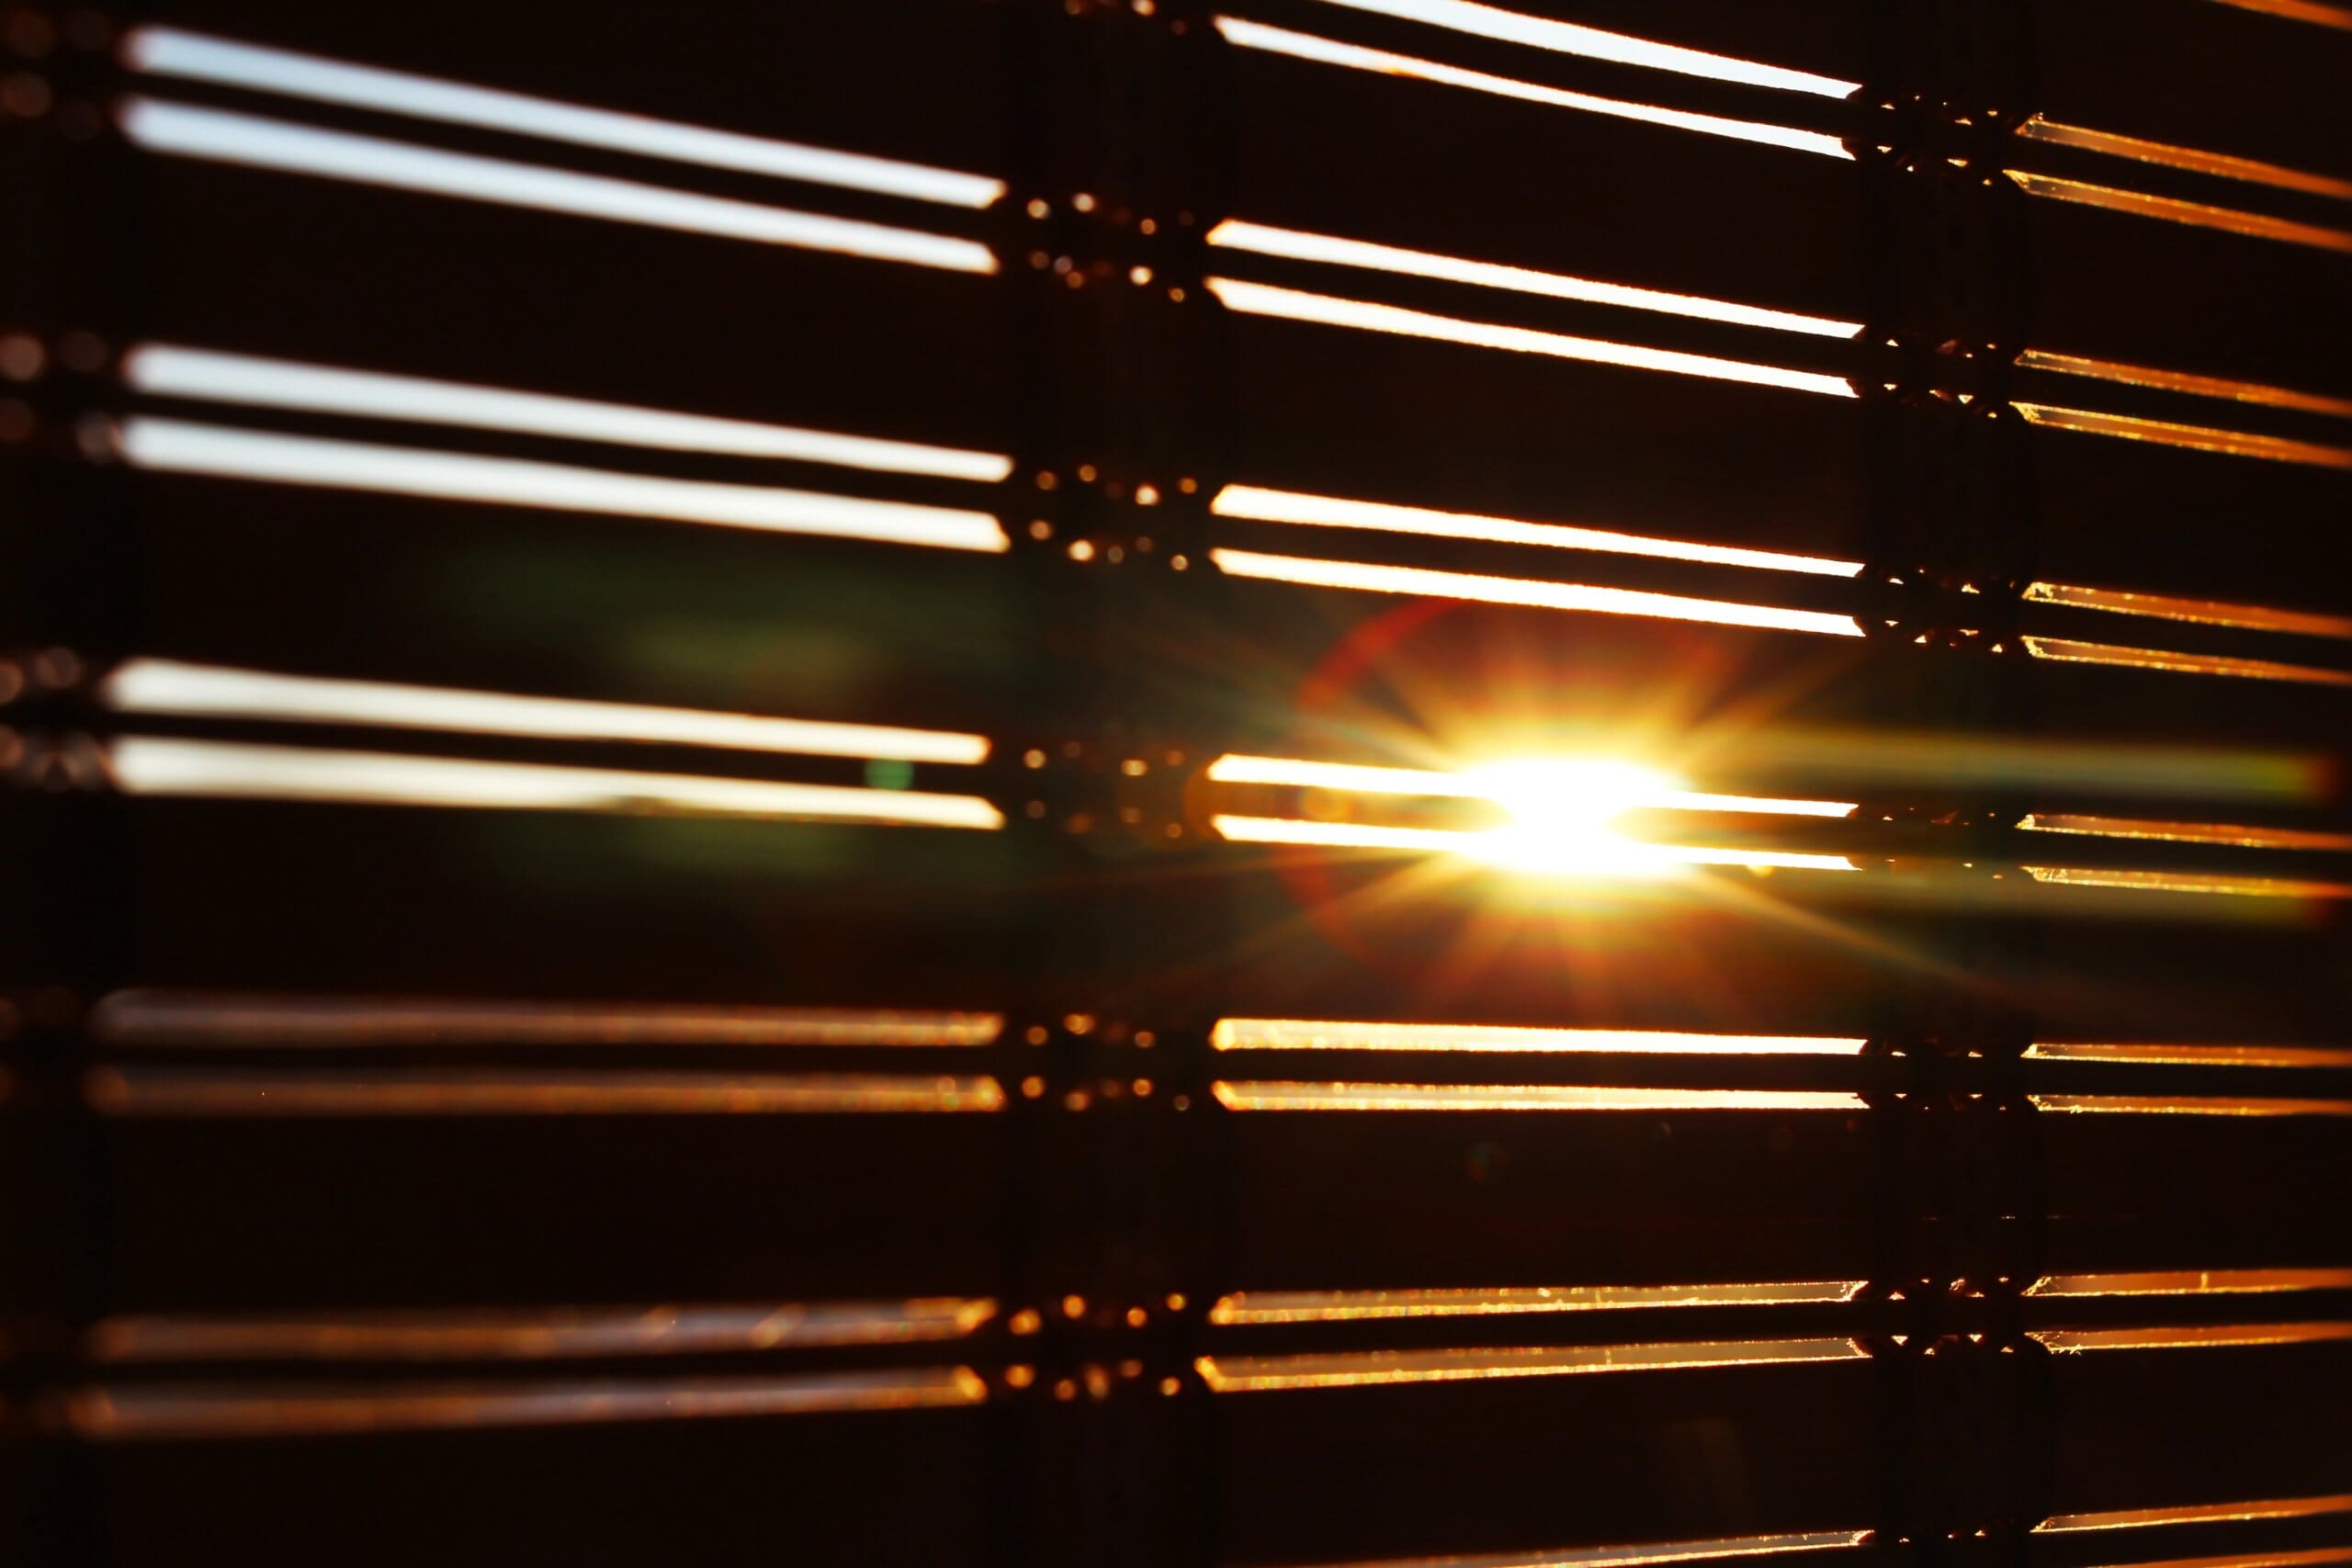 Rays of sunshine peaking through bedroom blinds.